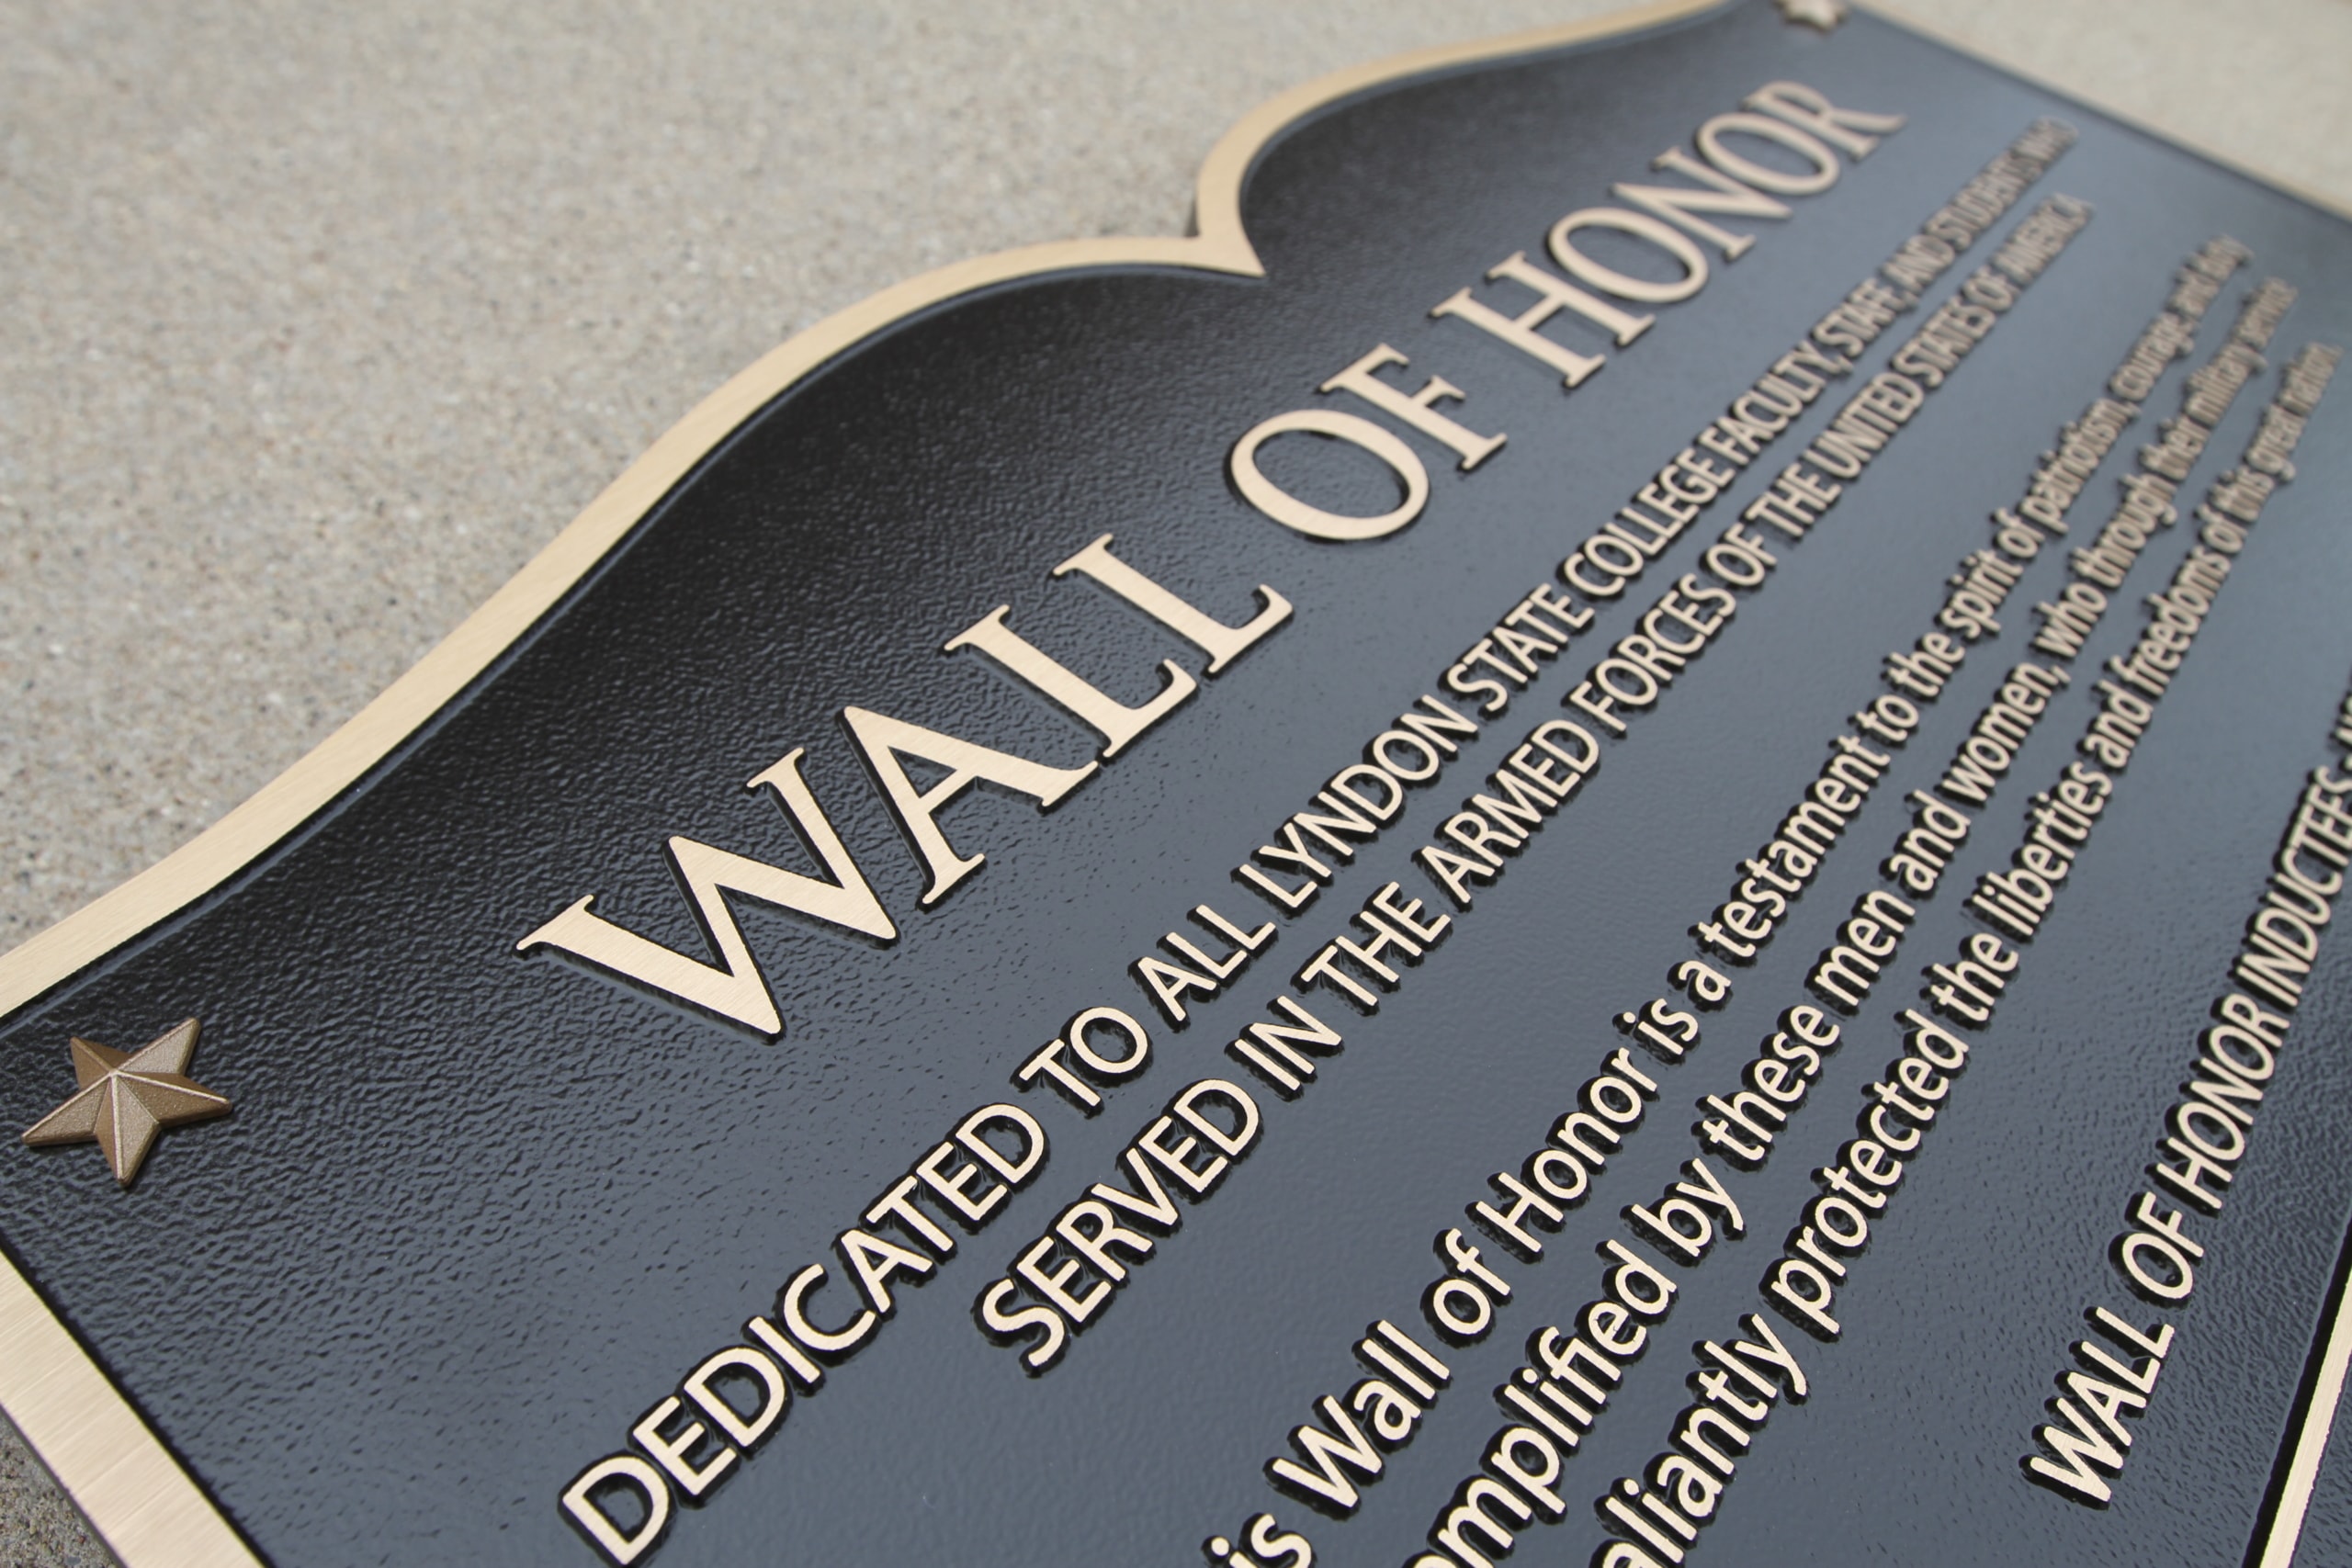 An example of a wall of honor, this close-up photo of a cast bronze plaque shows that it is dedicated to Lyndon State College Faculty in Lyndon, Vermont.